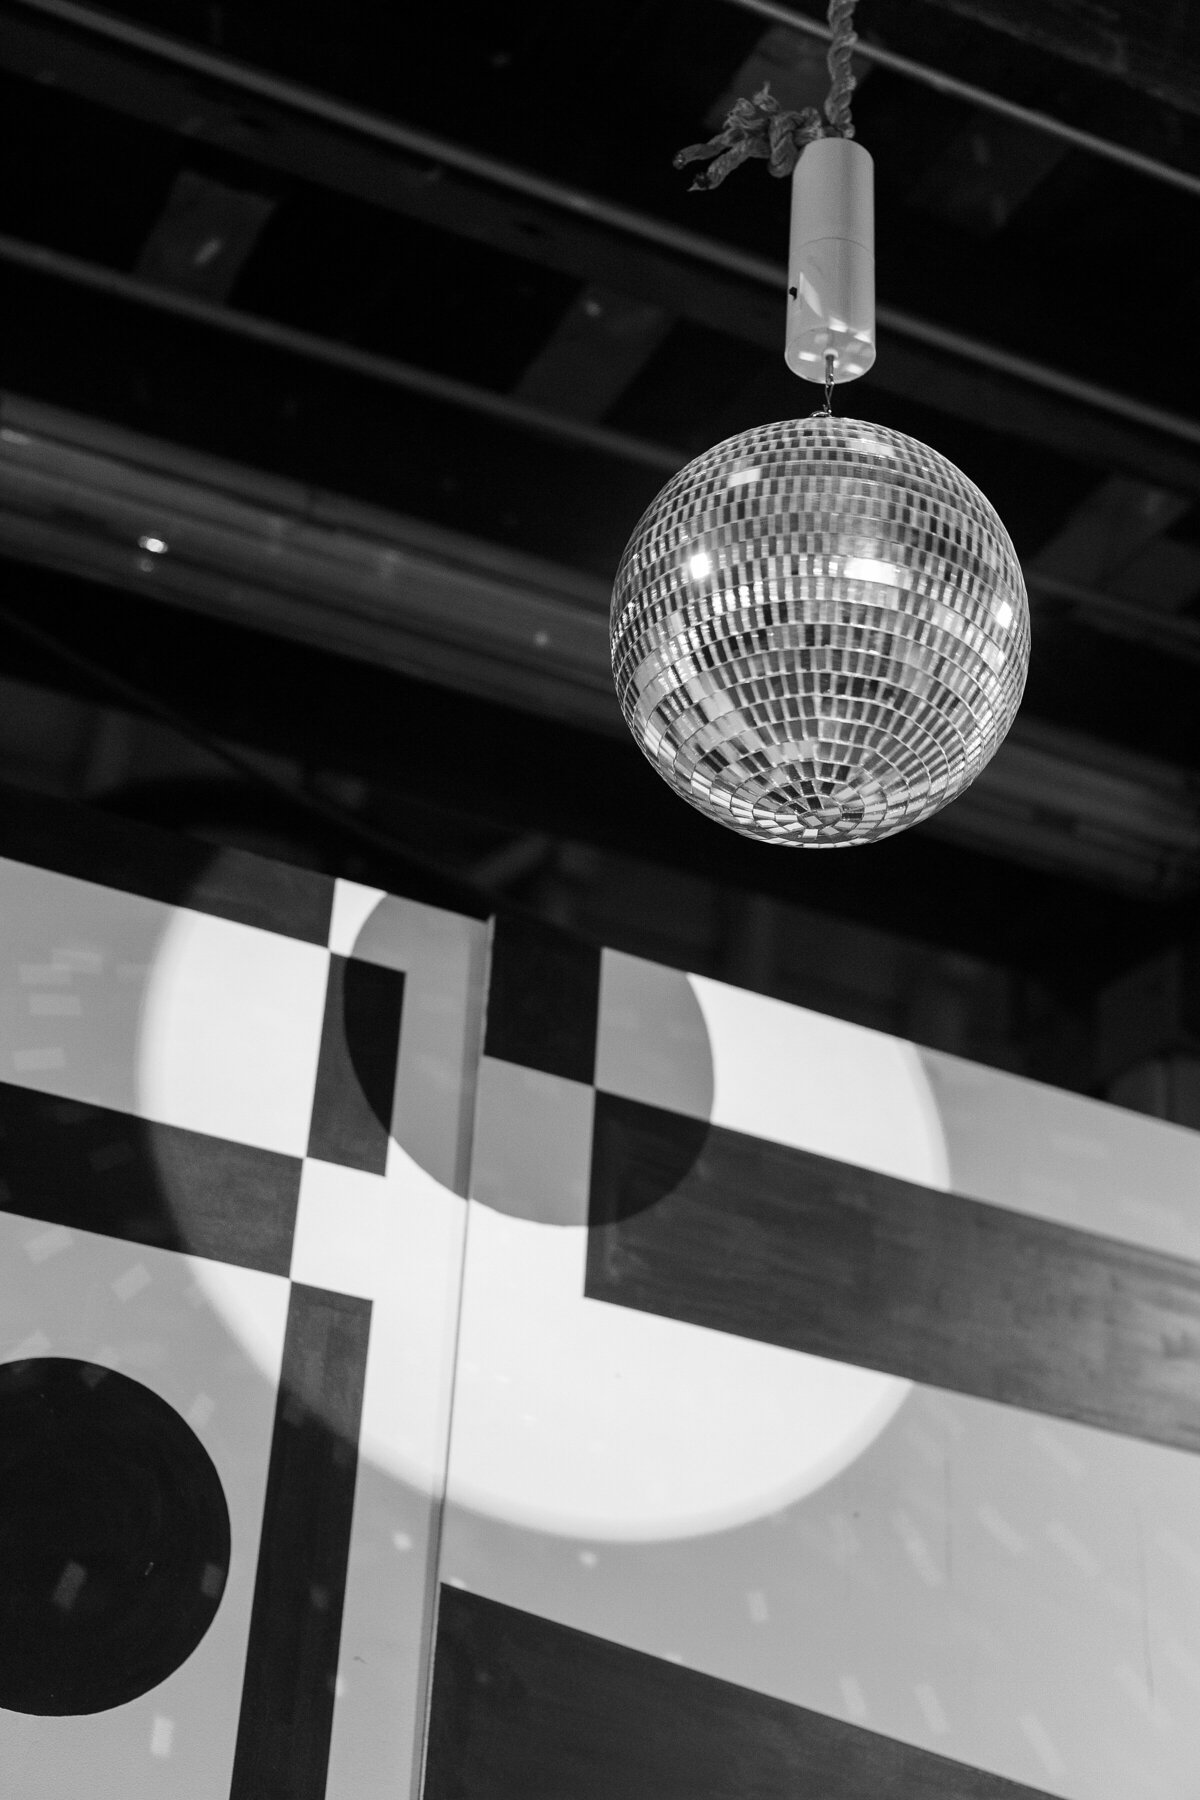 Disco ball hangs in front of black and white geometric background